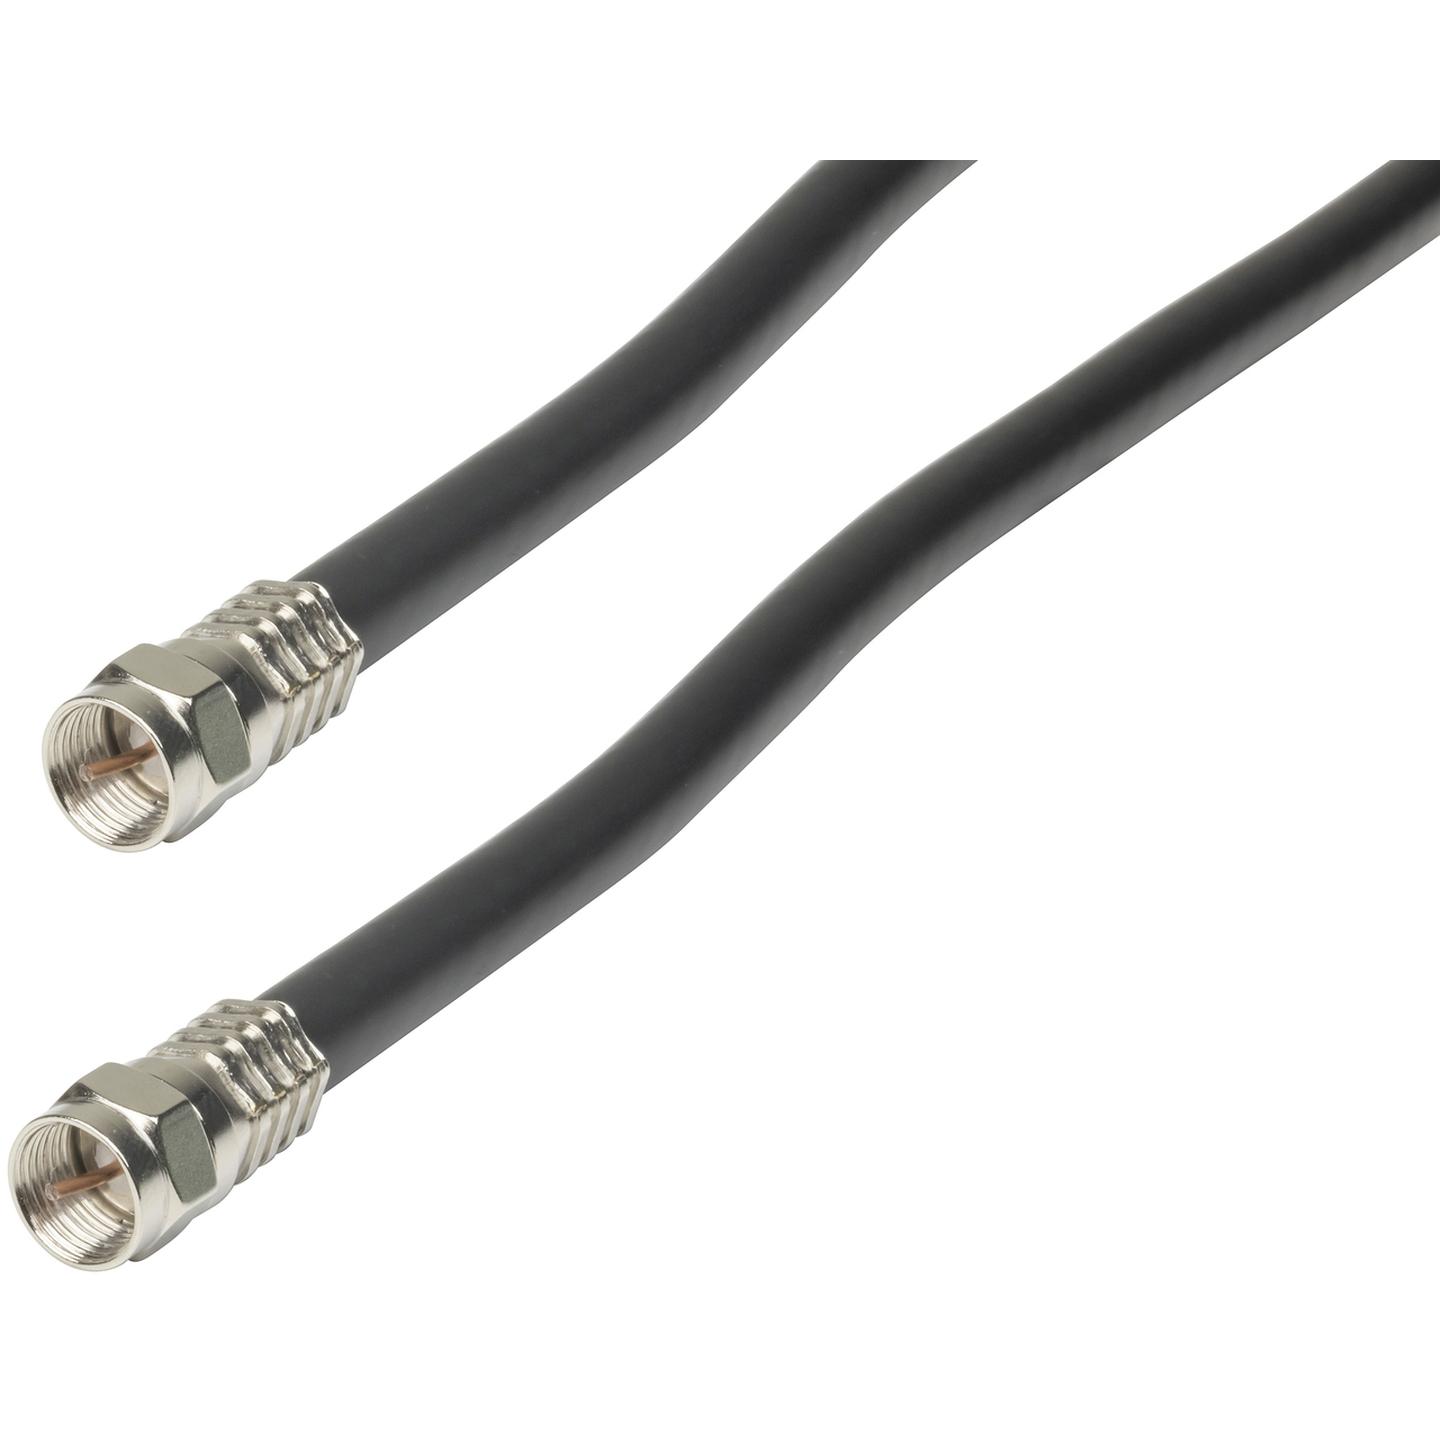 1.5m High Quality RG6 Quad Shield Cable with Crimped Connectors